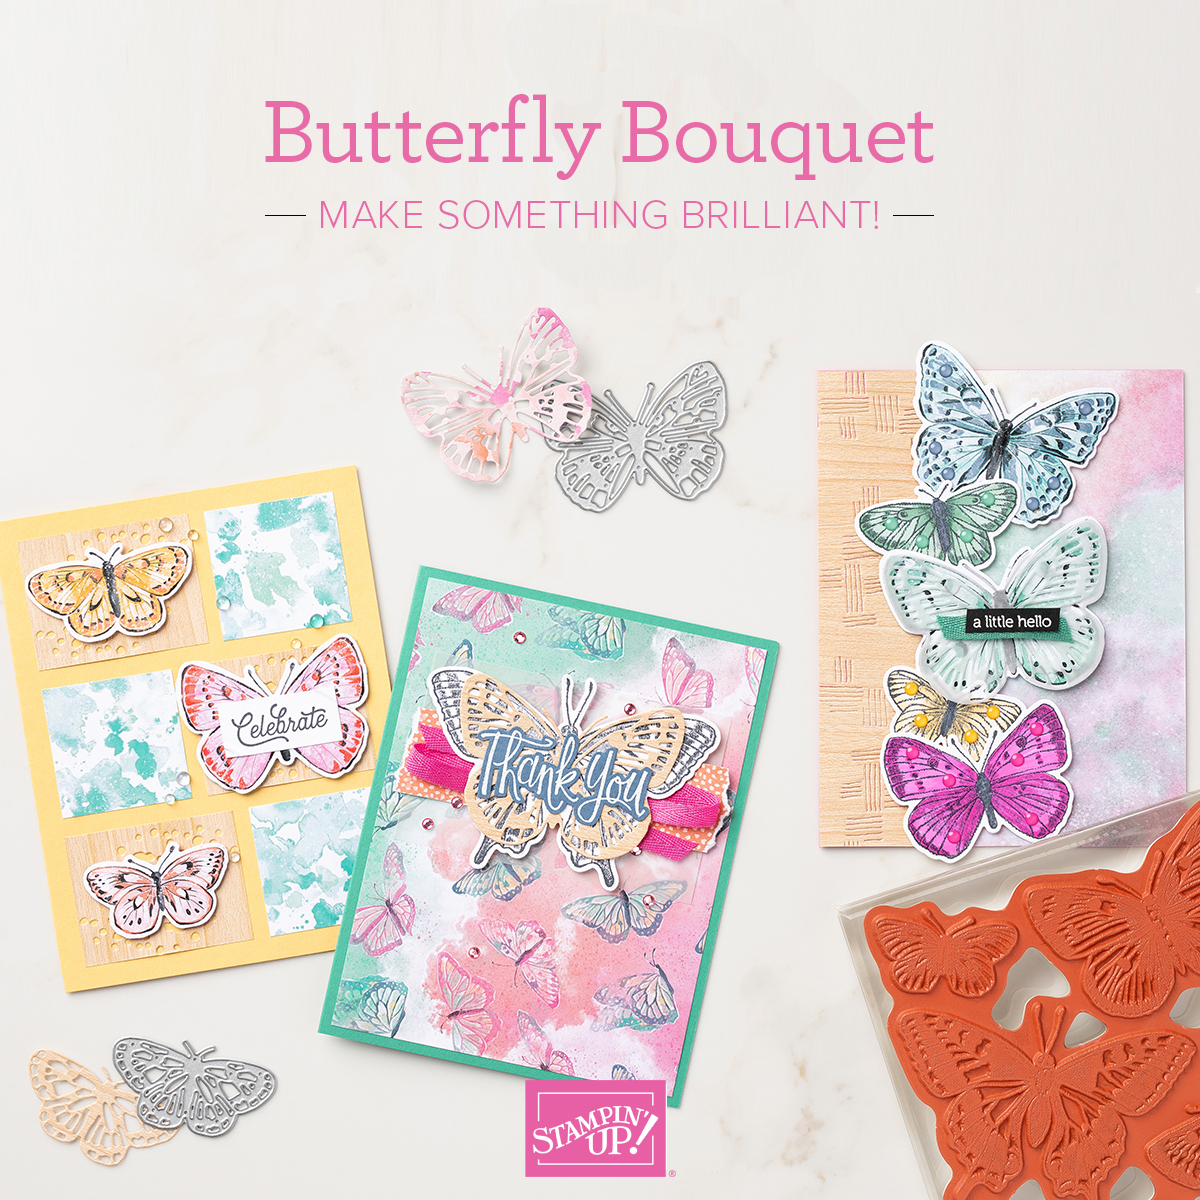 Butterfly bouquet stampin up